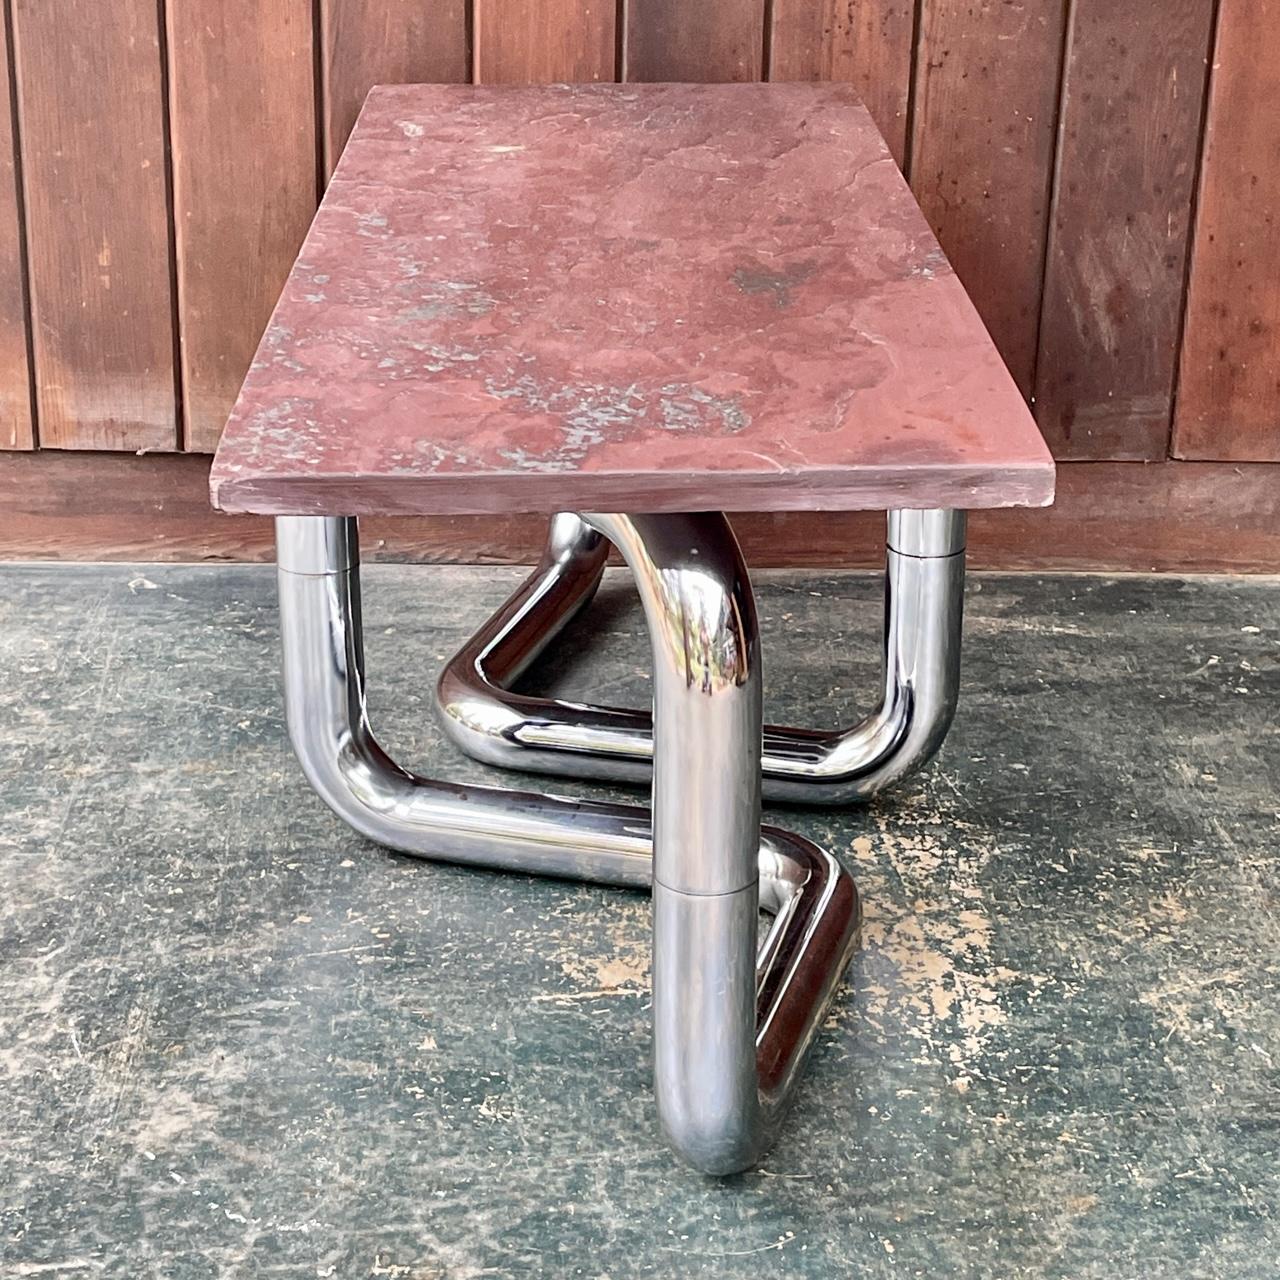 Modern50 Assemblage Slate Chrome Snake Cocktail Table Vintage Midcentury In Fair Condition For Sale In Hyattsville, MD